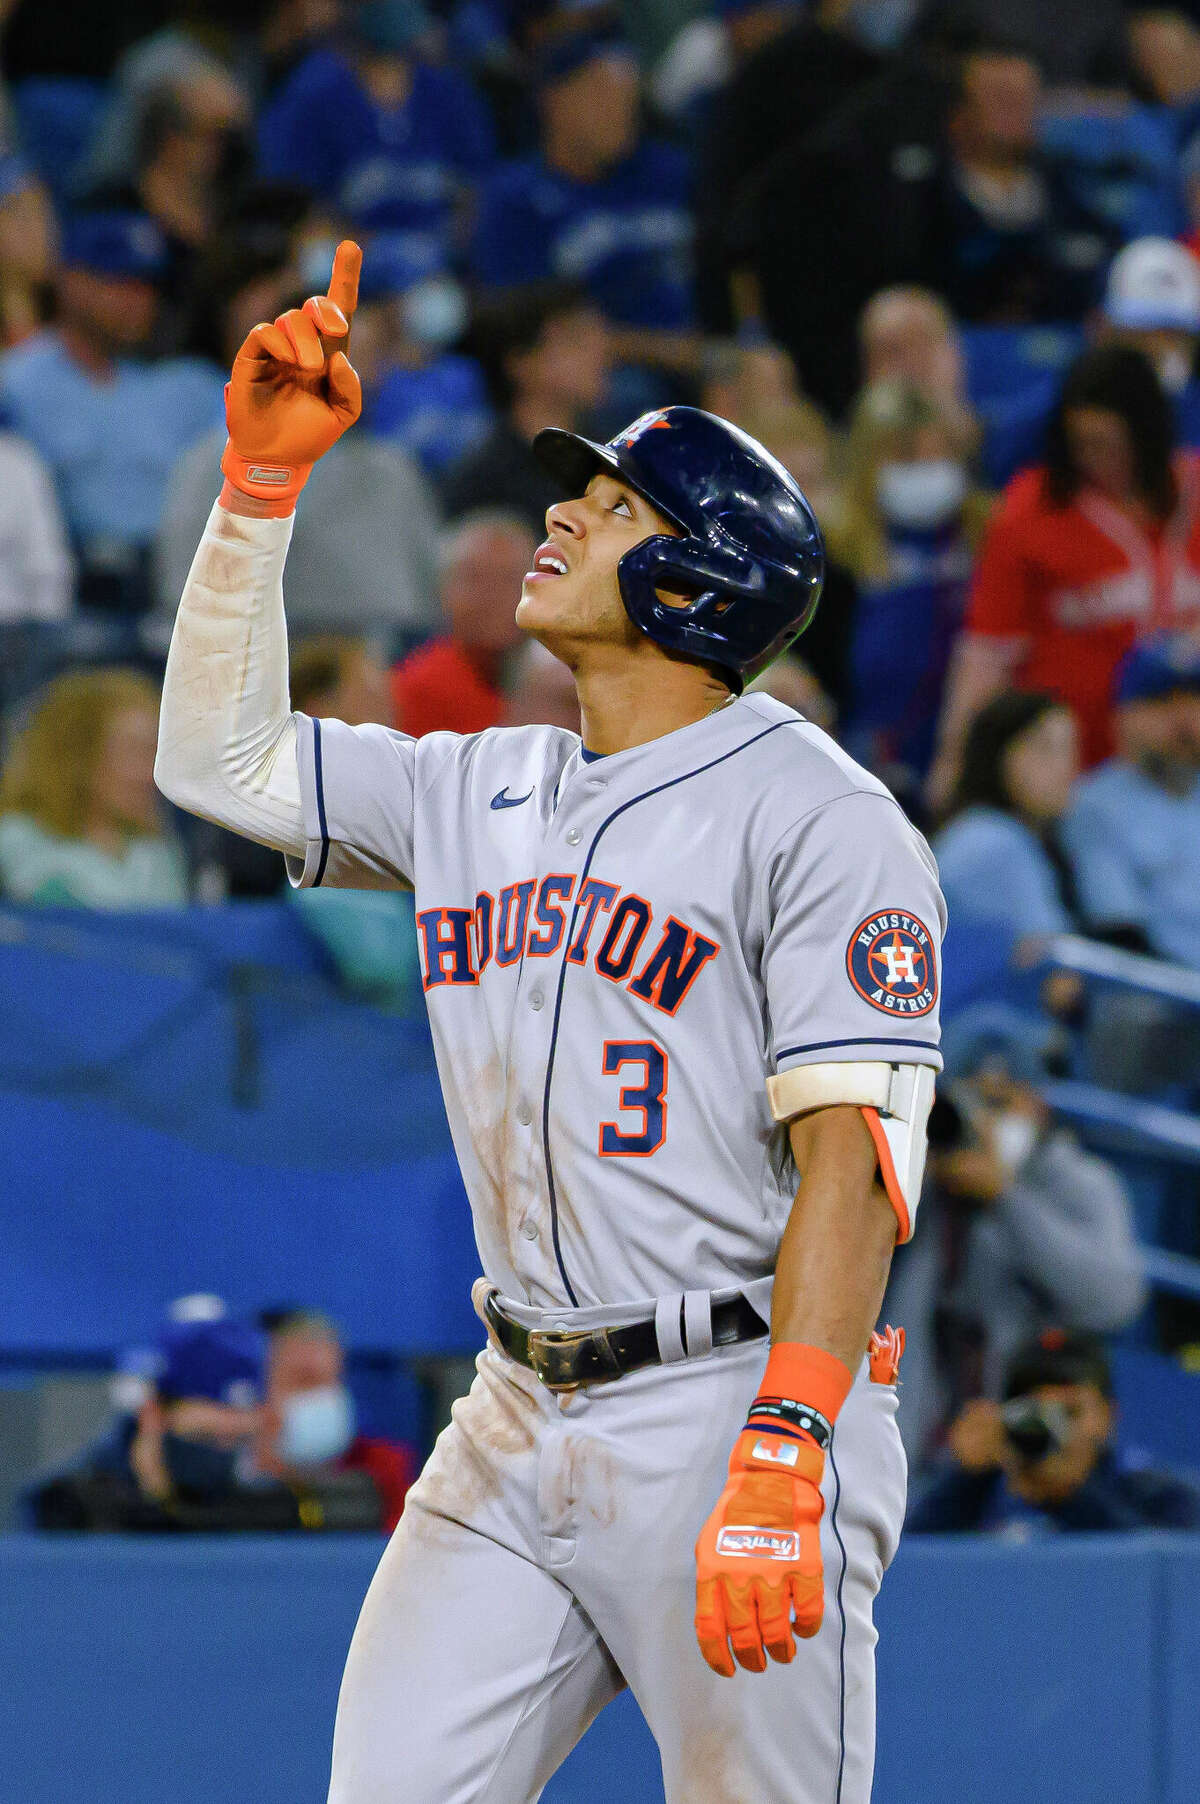 Houston Astros shortstop Jeremy Pena (3) celebrates after hitting a home run during the sixth inning of a baseball game against the Toronto Blue Jays on Friday, April 29, 2022, in Toronto. (Christopher Katsarov/The Canadian Press via AP)